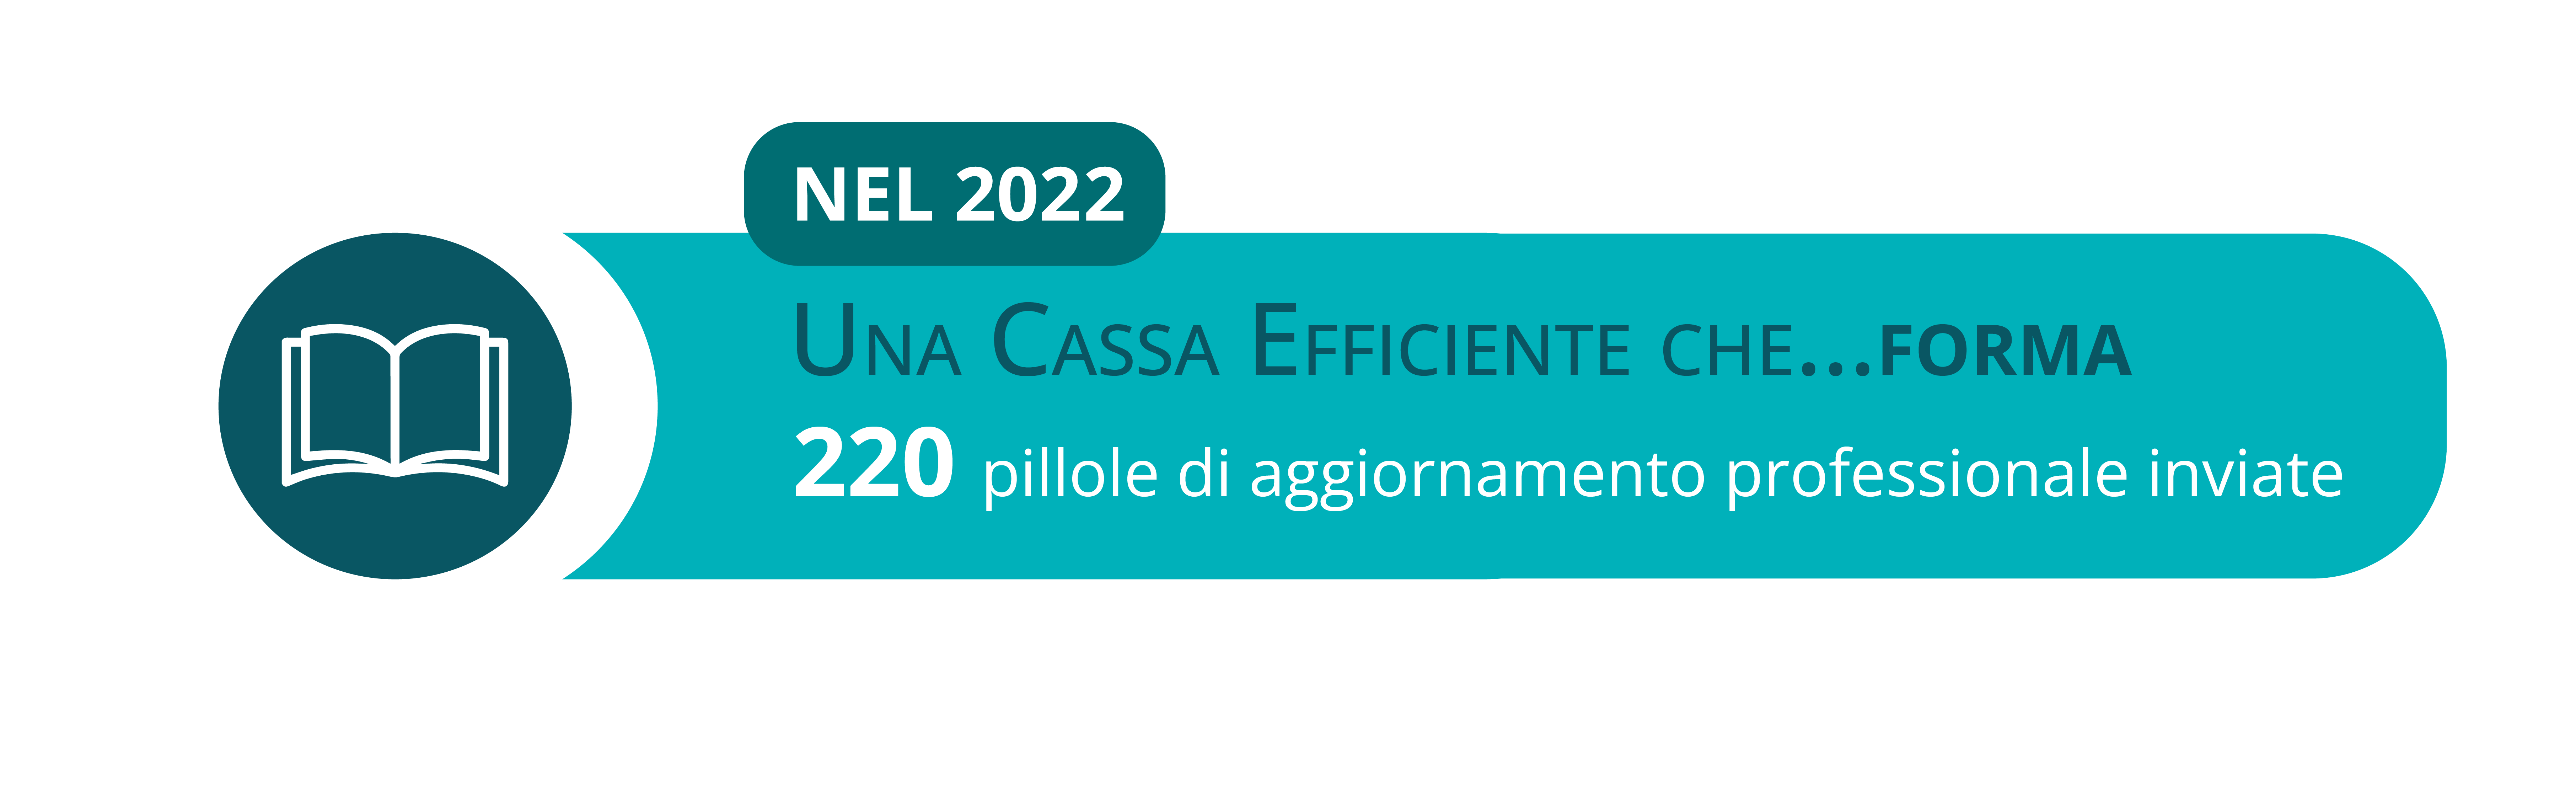 Forma 2022.png